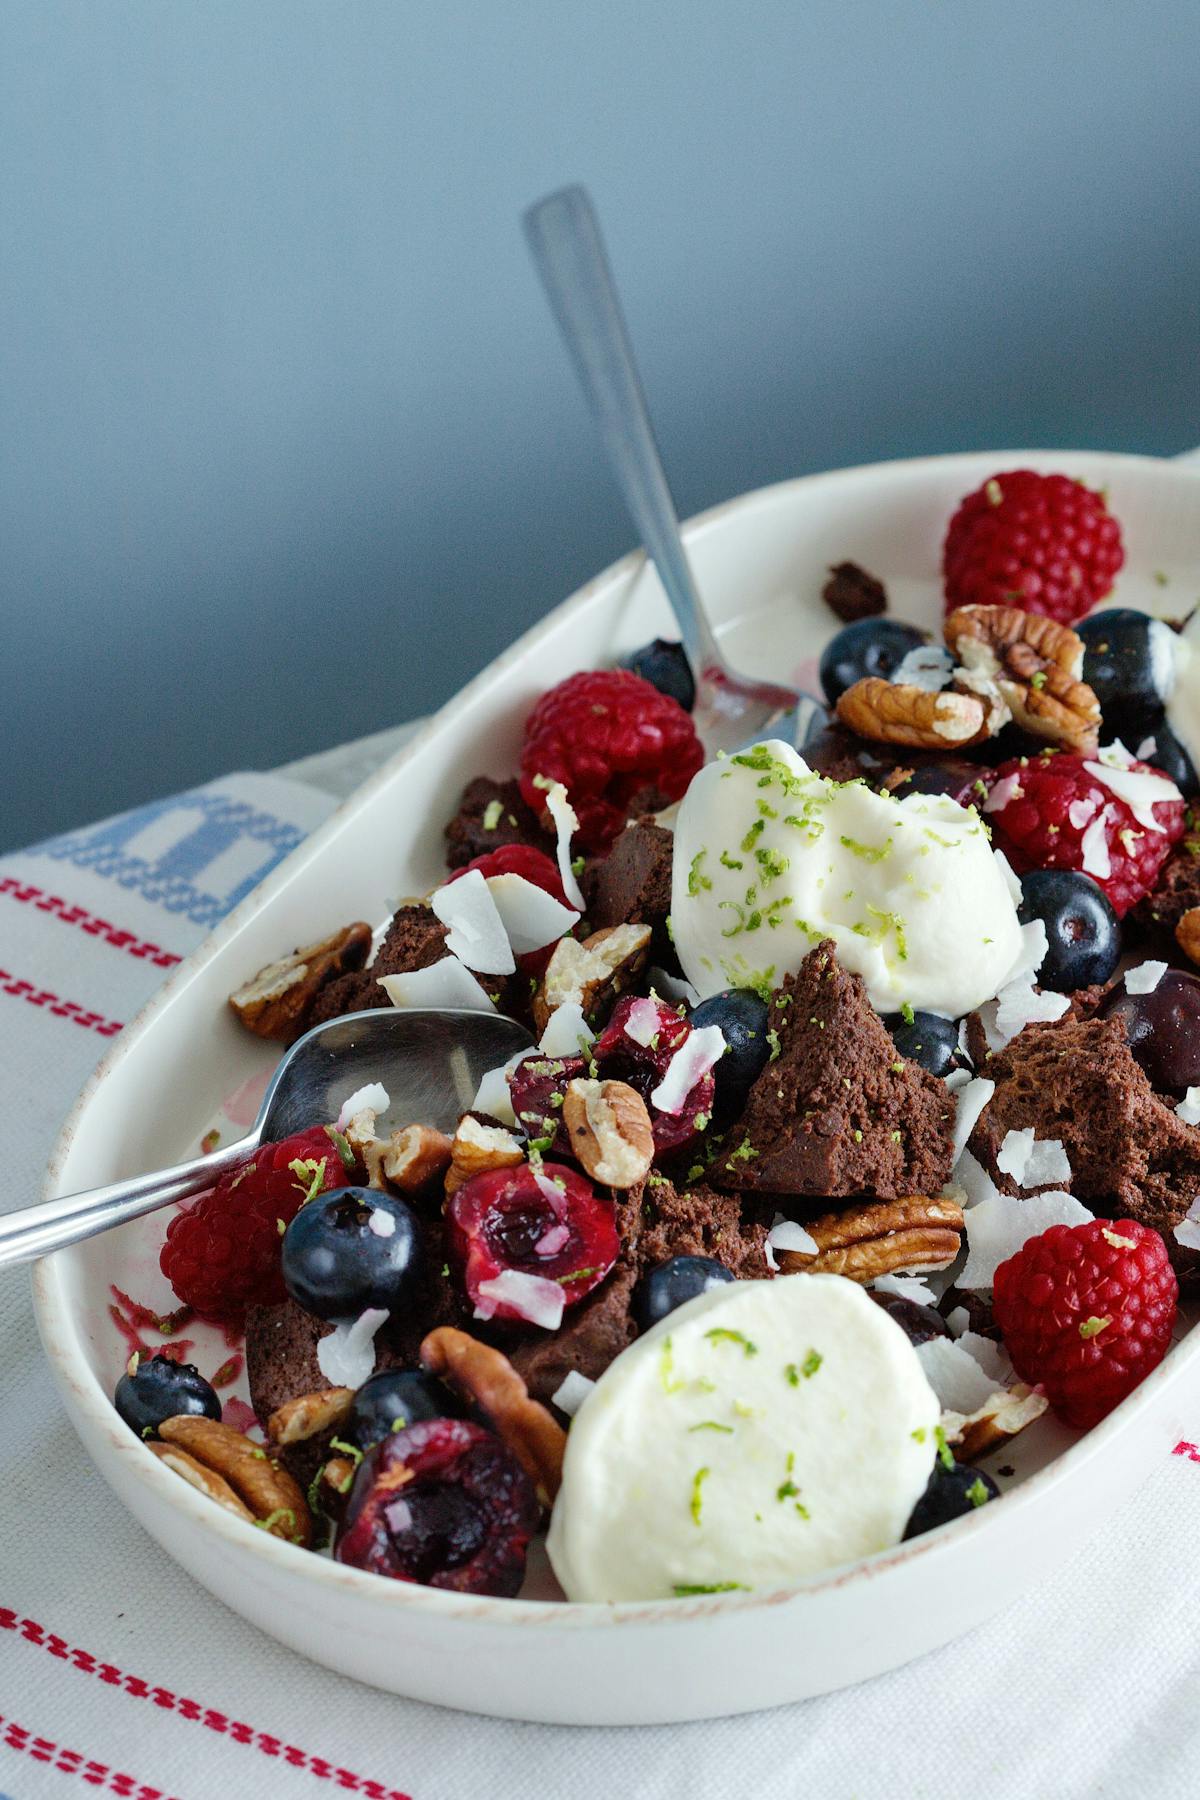 Low carb chocolate mess with berries and cream